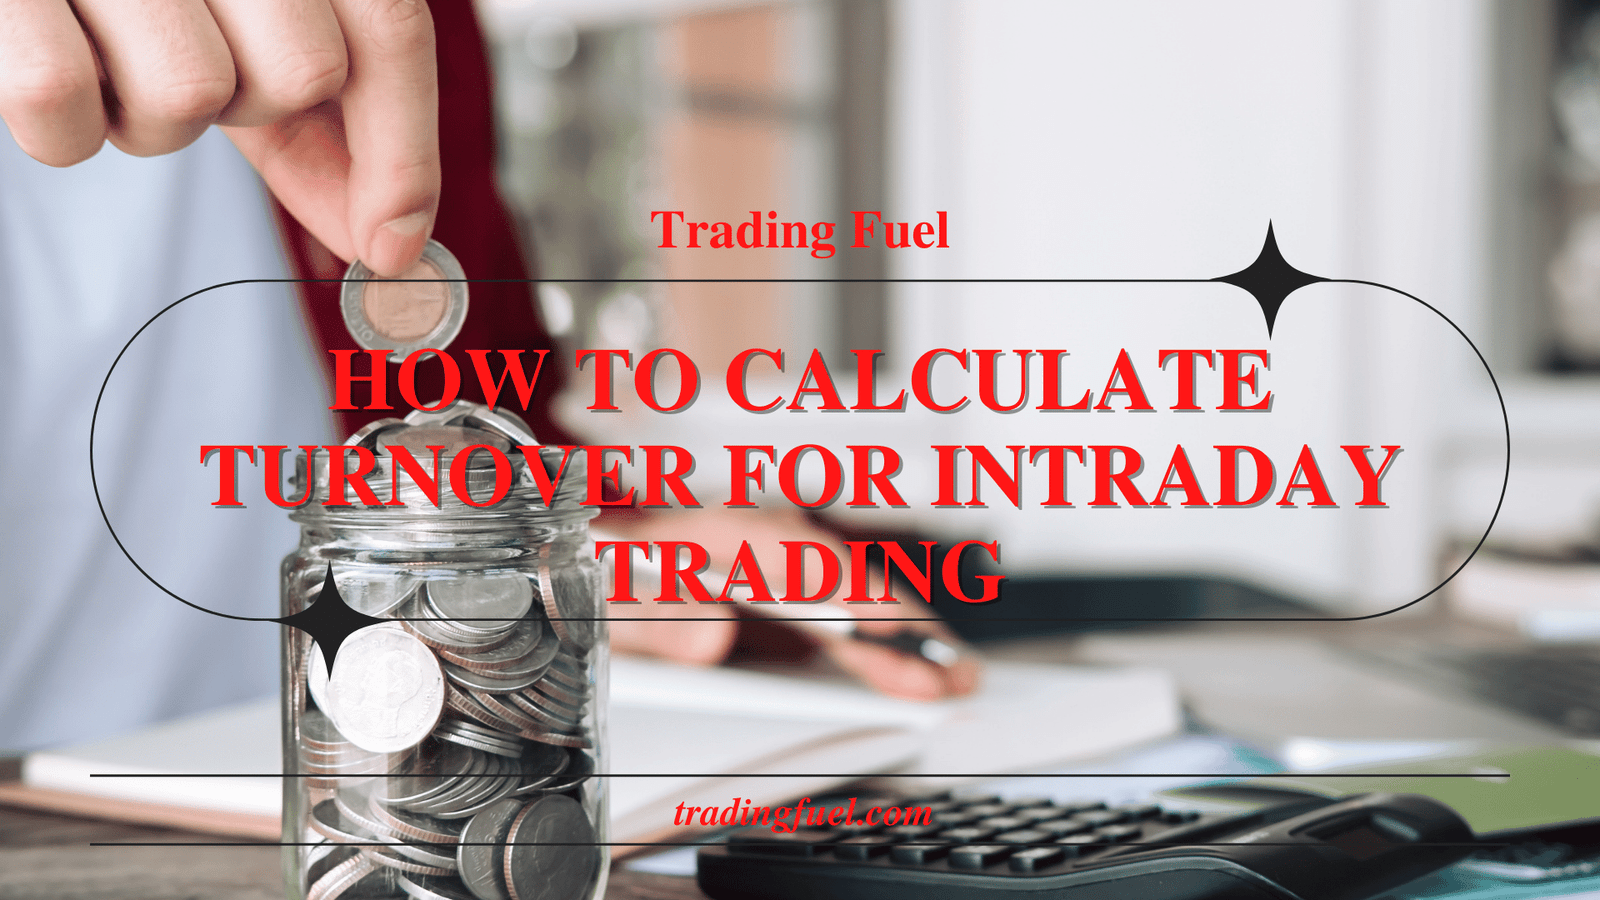 How to Calculate Turnover for Intraday Trading?